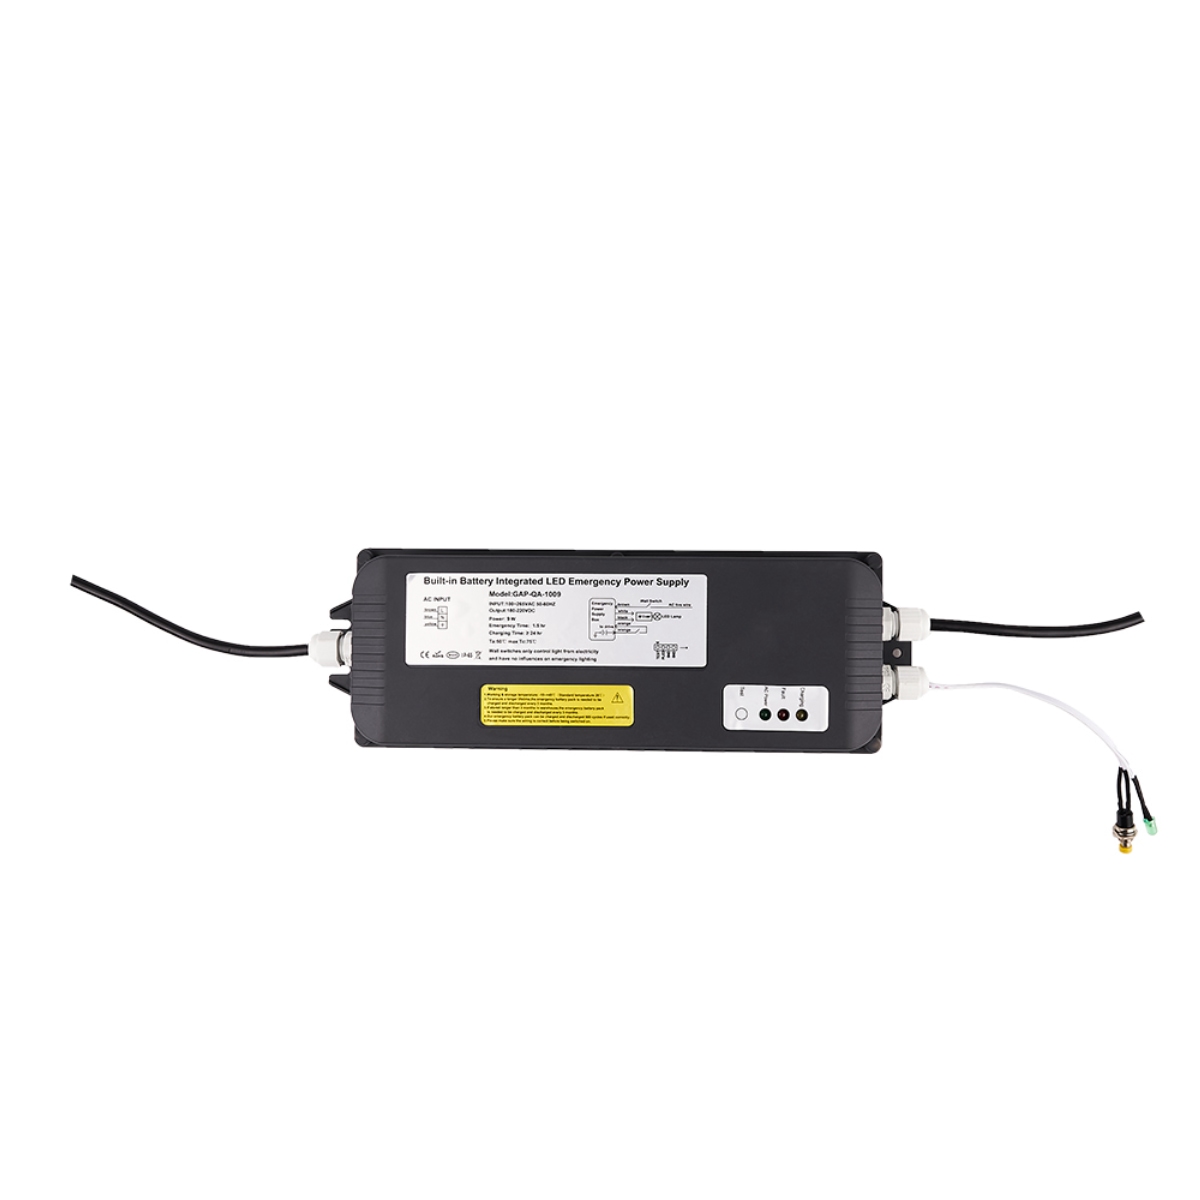 5W/7W/9W Built-in Battery Integrated LED Emergency Power Supply with IP65  GAP-QA-1004